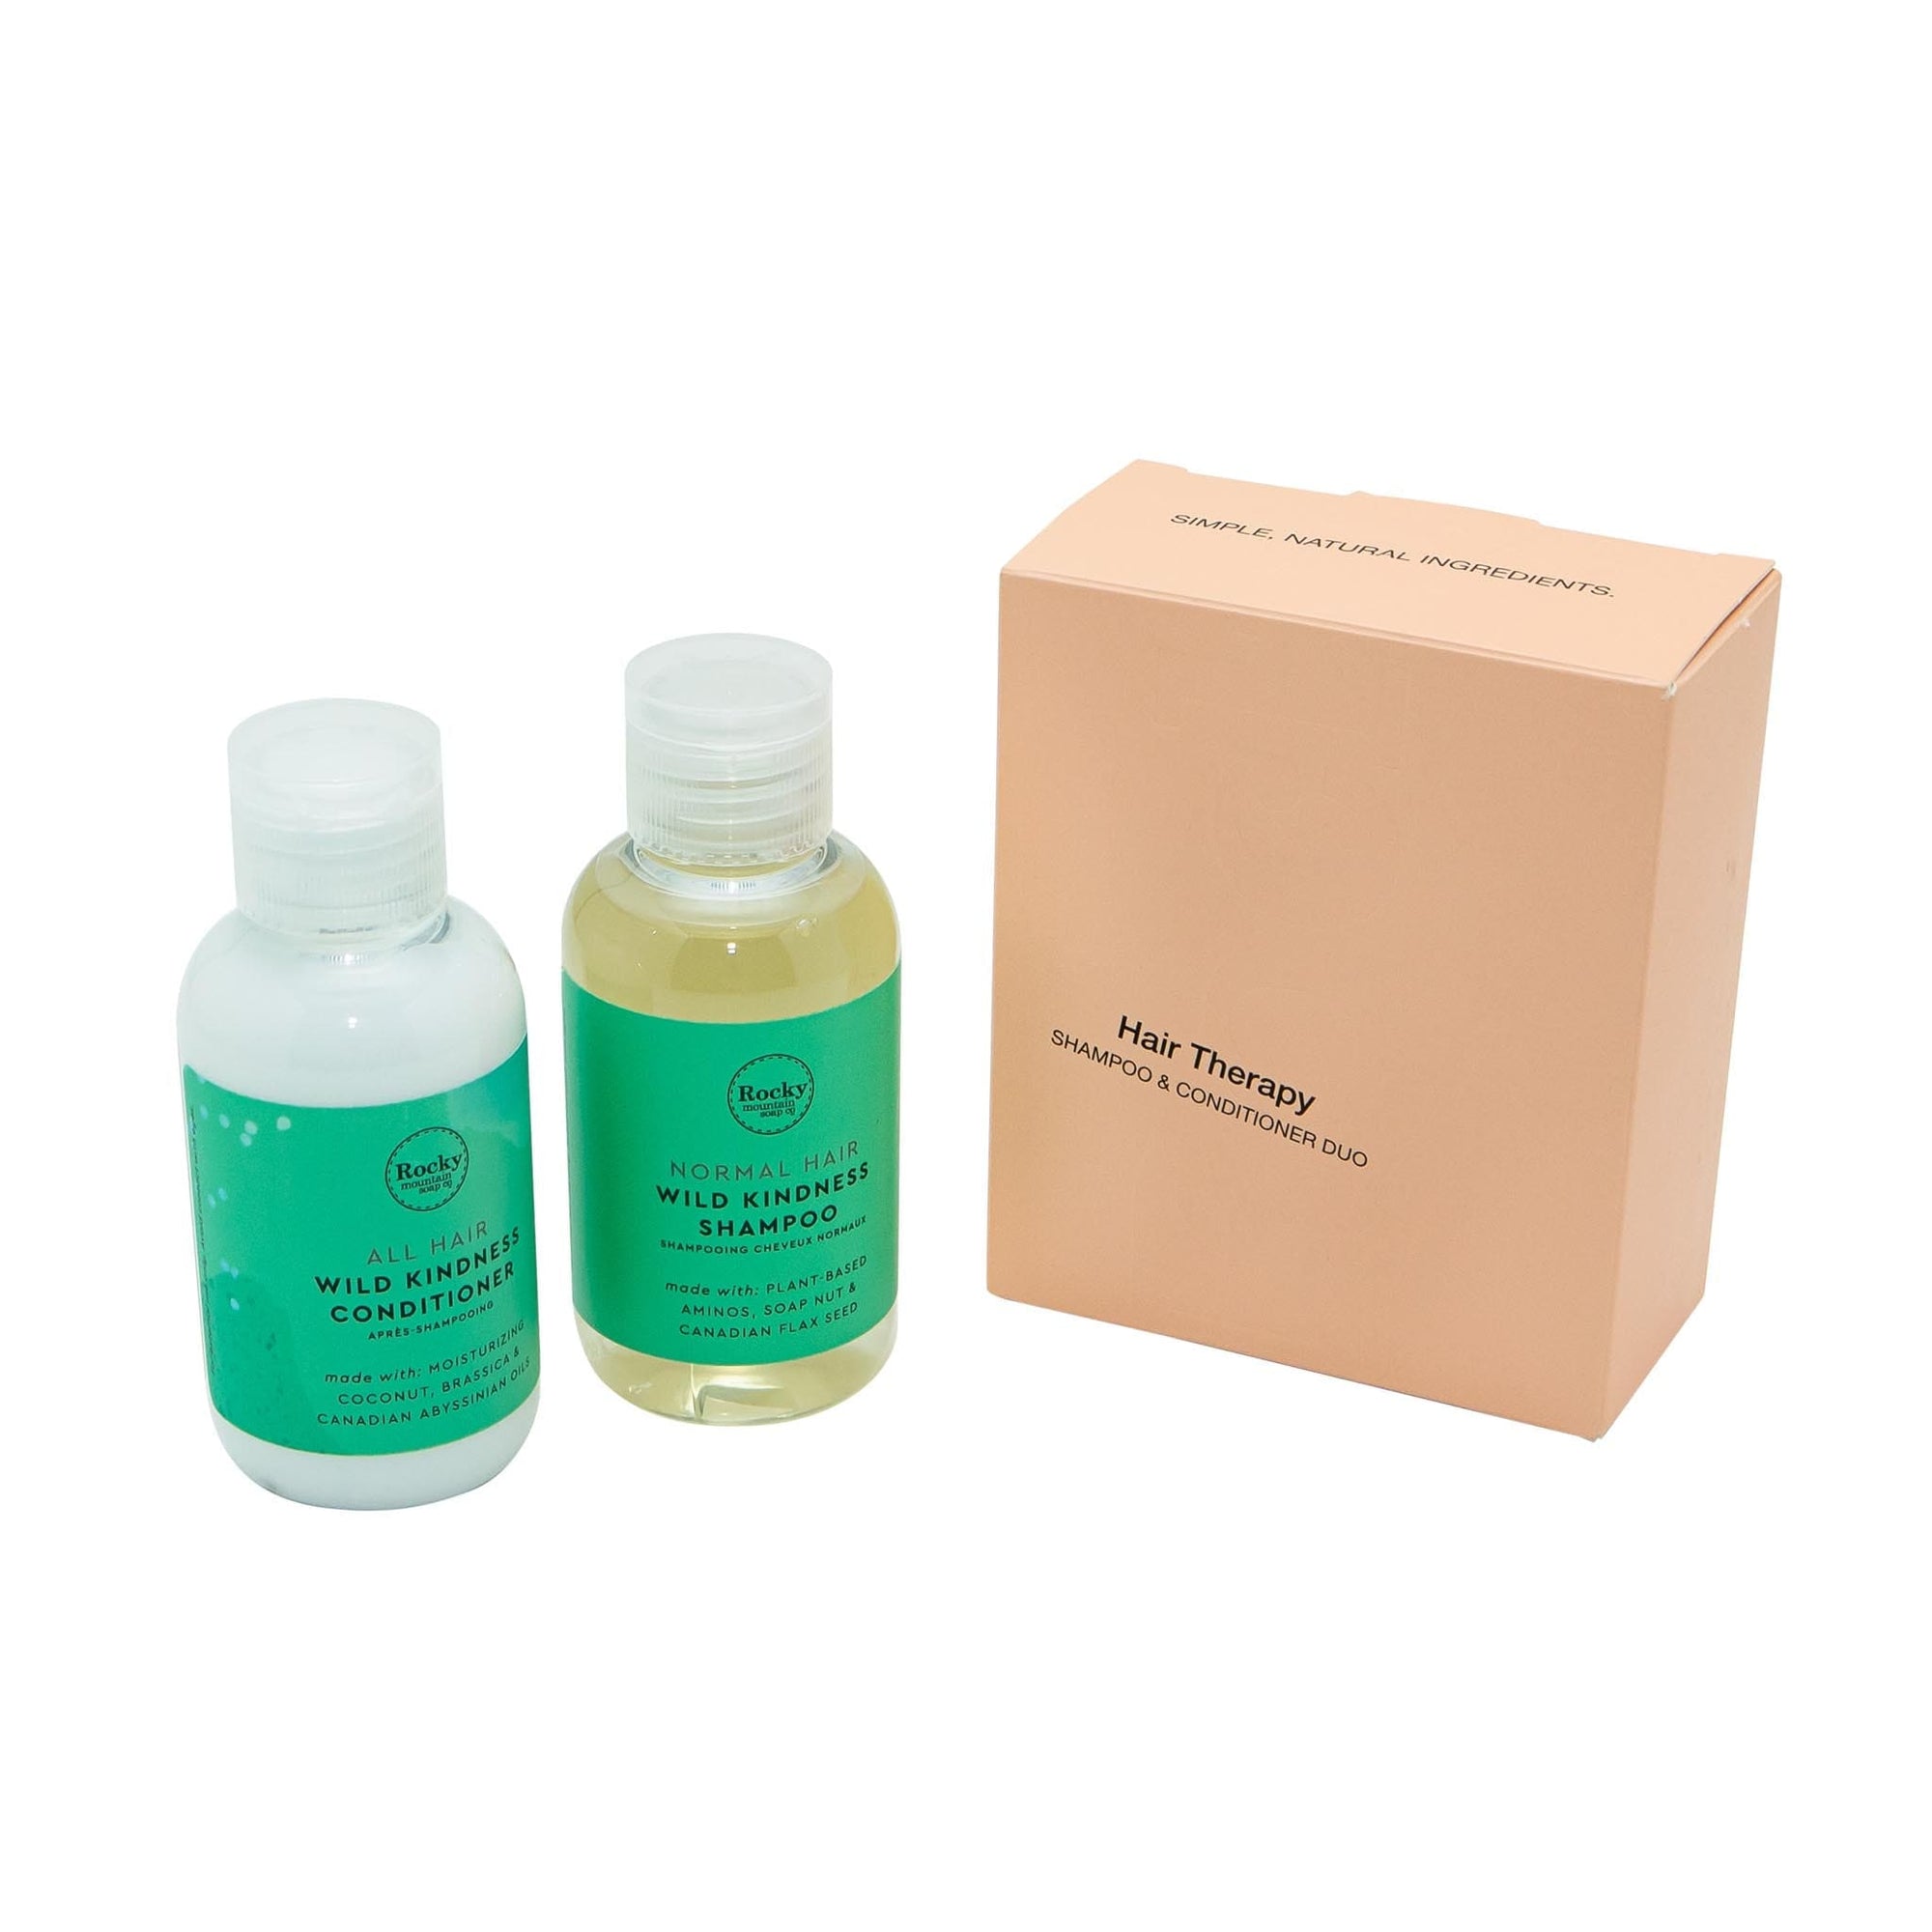 Hair Therapy | Shampoo & Conditioner Gift Set